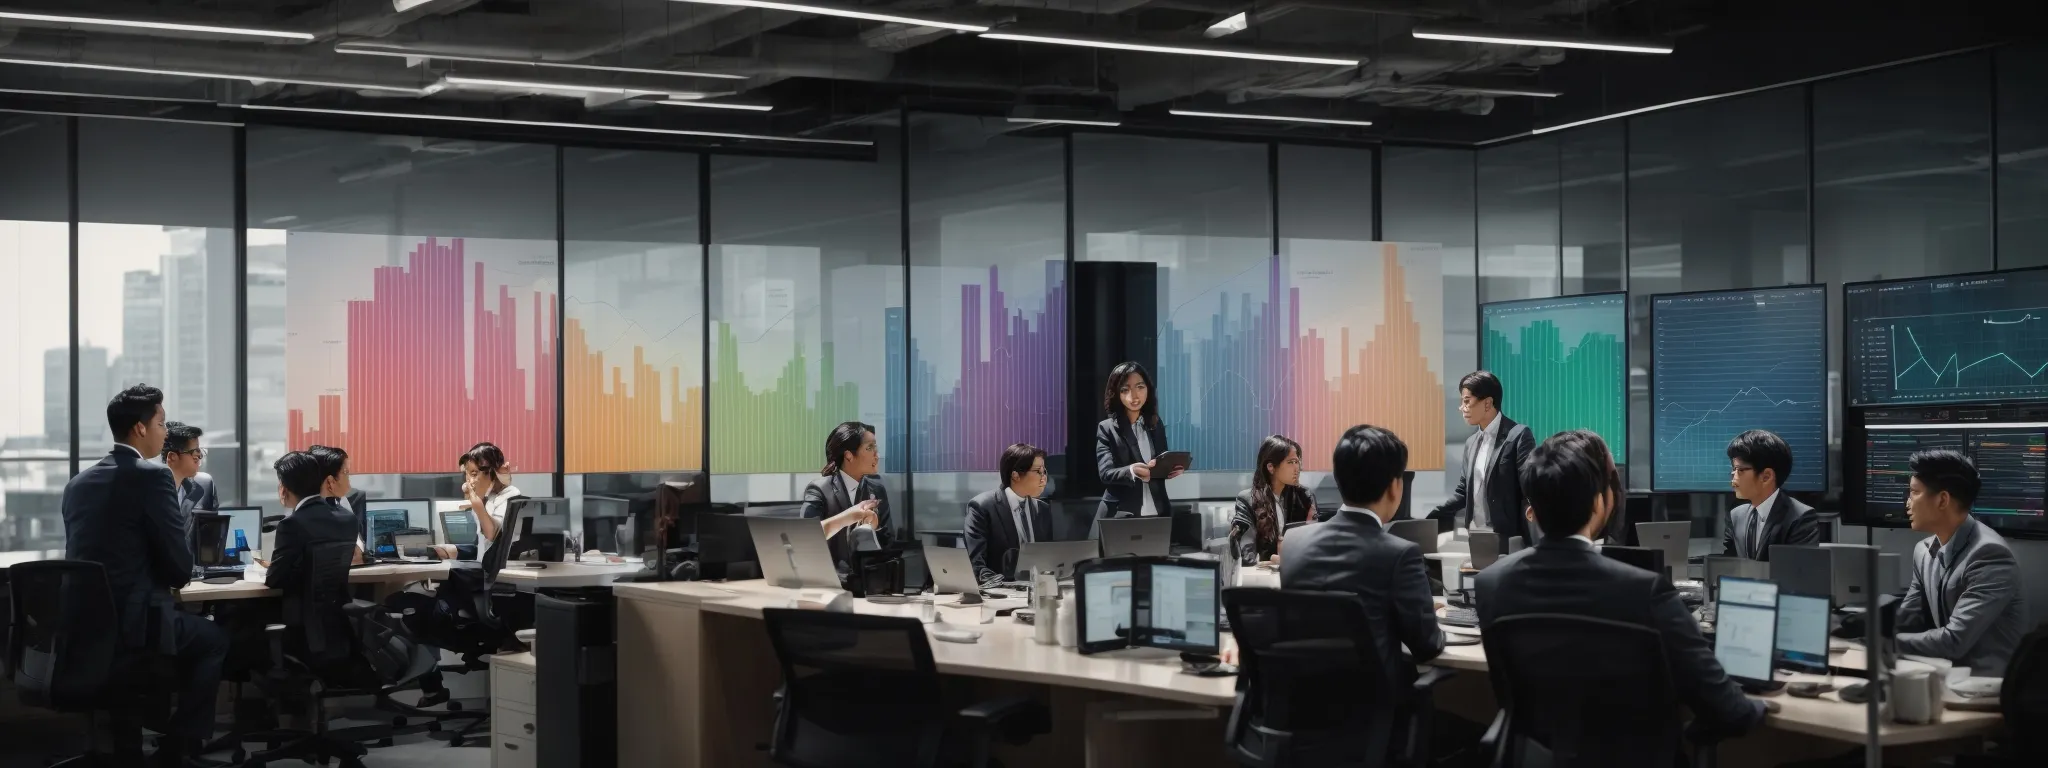 a bustling team meeting with a large monitor displaying a colorful graph and analytics dashboard within a modern office setting.